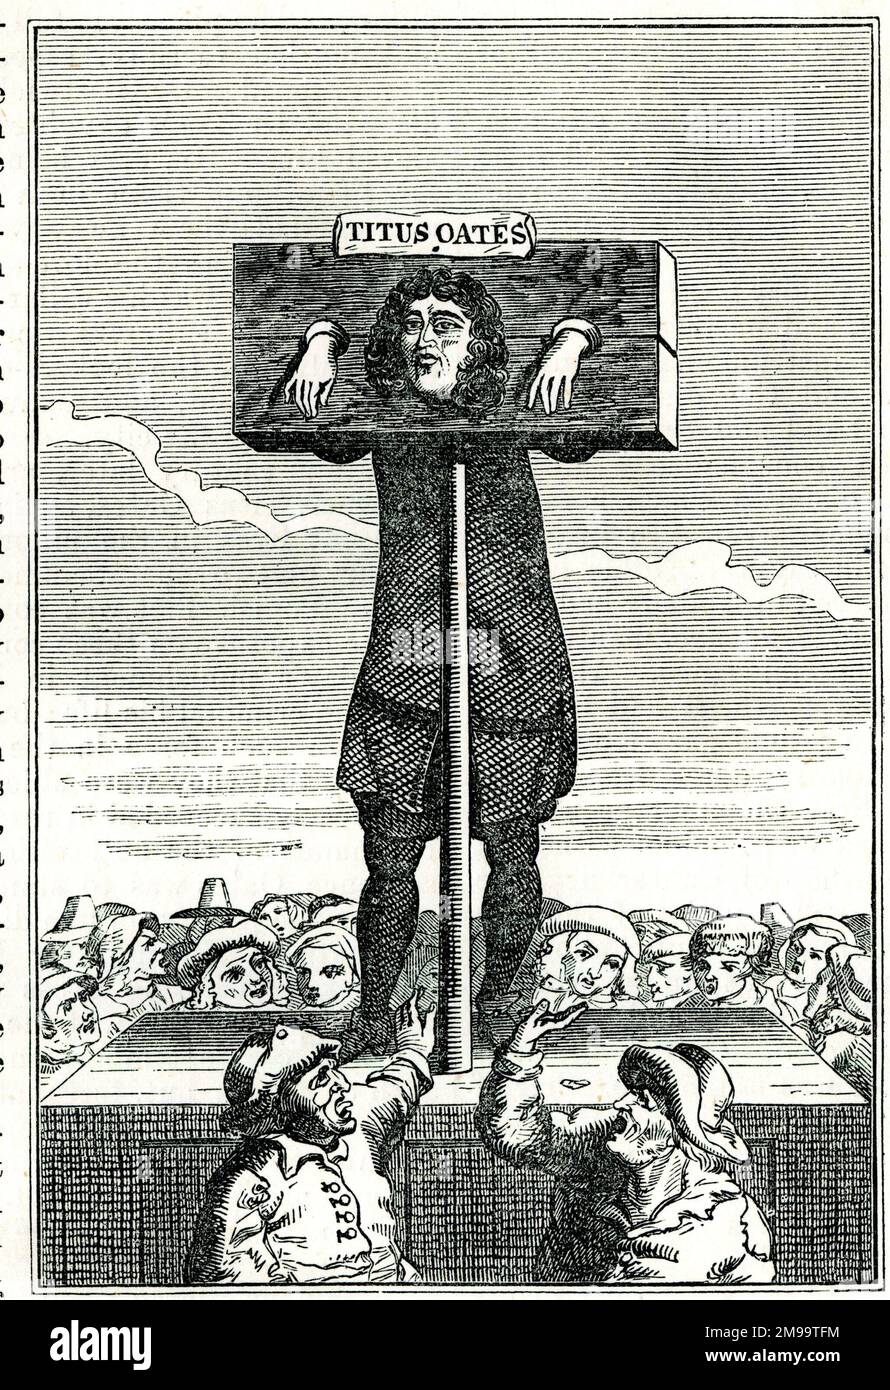 Titus Oates (1649 -1 705), English perjurer, seen here in the pillory, a punishment for fabricating the Popish Plot. Stock Photo